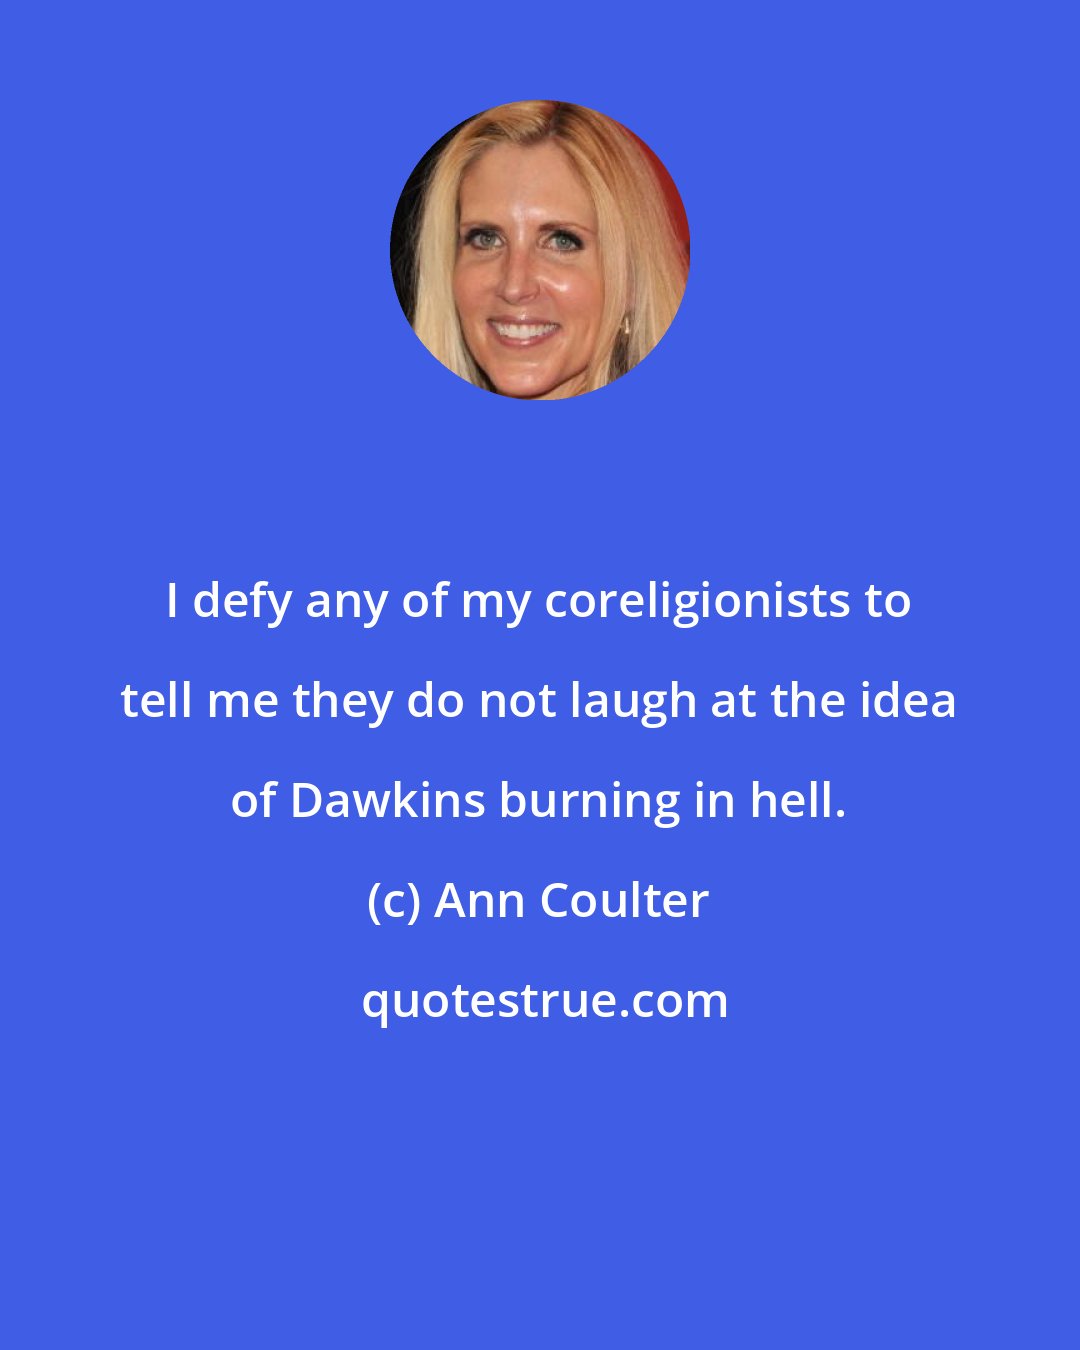 Ann Coulter: I defy any of my coreligionists to tell me they do not laugh at the idea of Dawkins burning in hell.